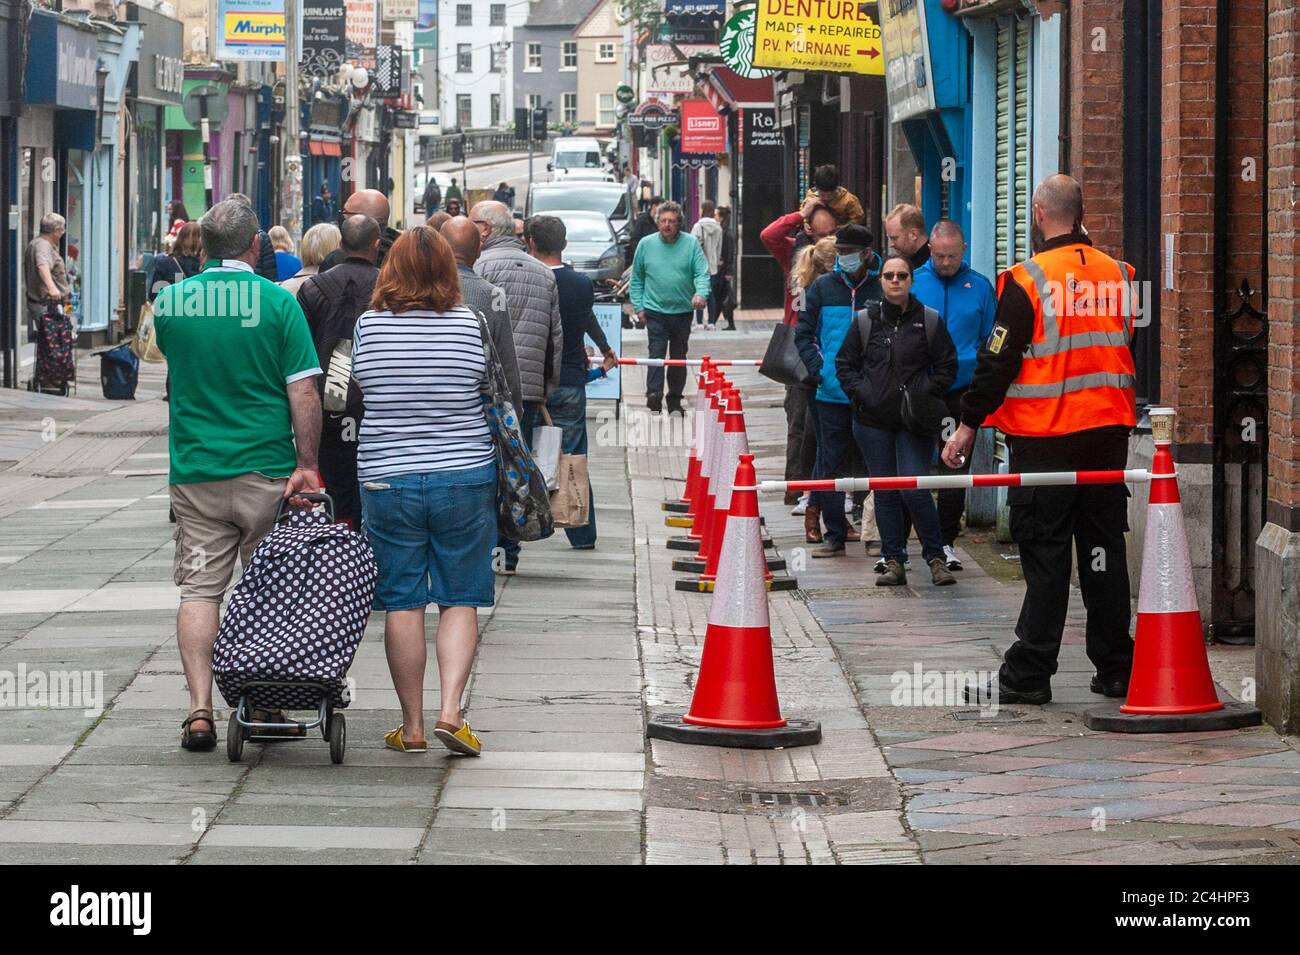 Cork, Ireland. 27th June, 2020. Cork City was busy with shoppers today, as things get back to a new normal after the Coronavirus lockdown. There was a big queue to get into the world famous English Market in Cork City. Credit: AG News/Alamy Live News Stock Photo